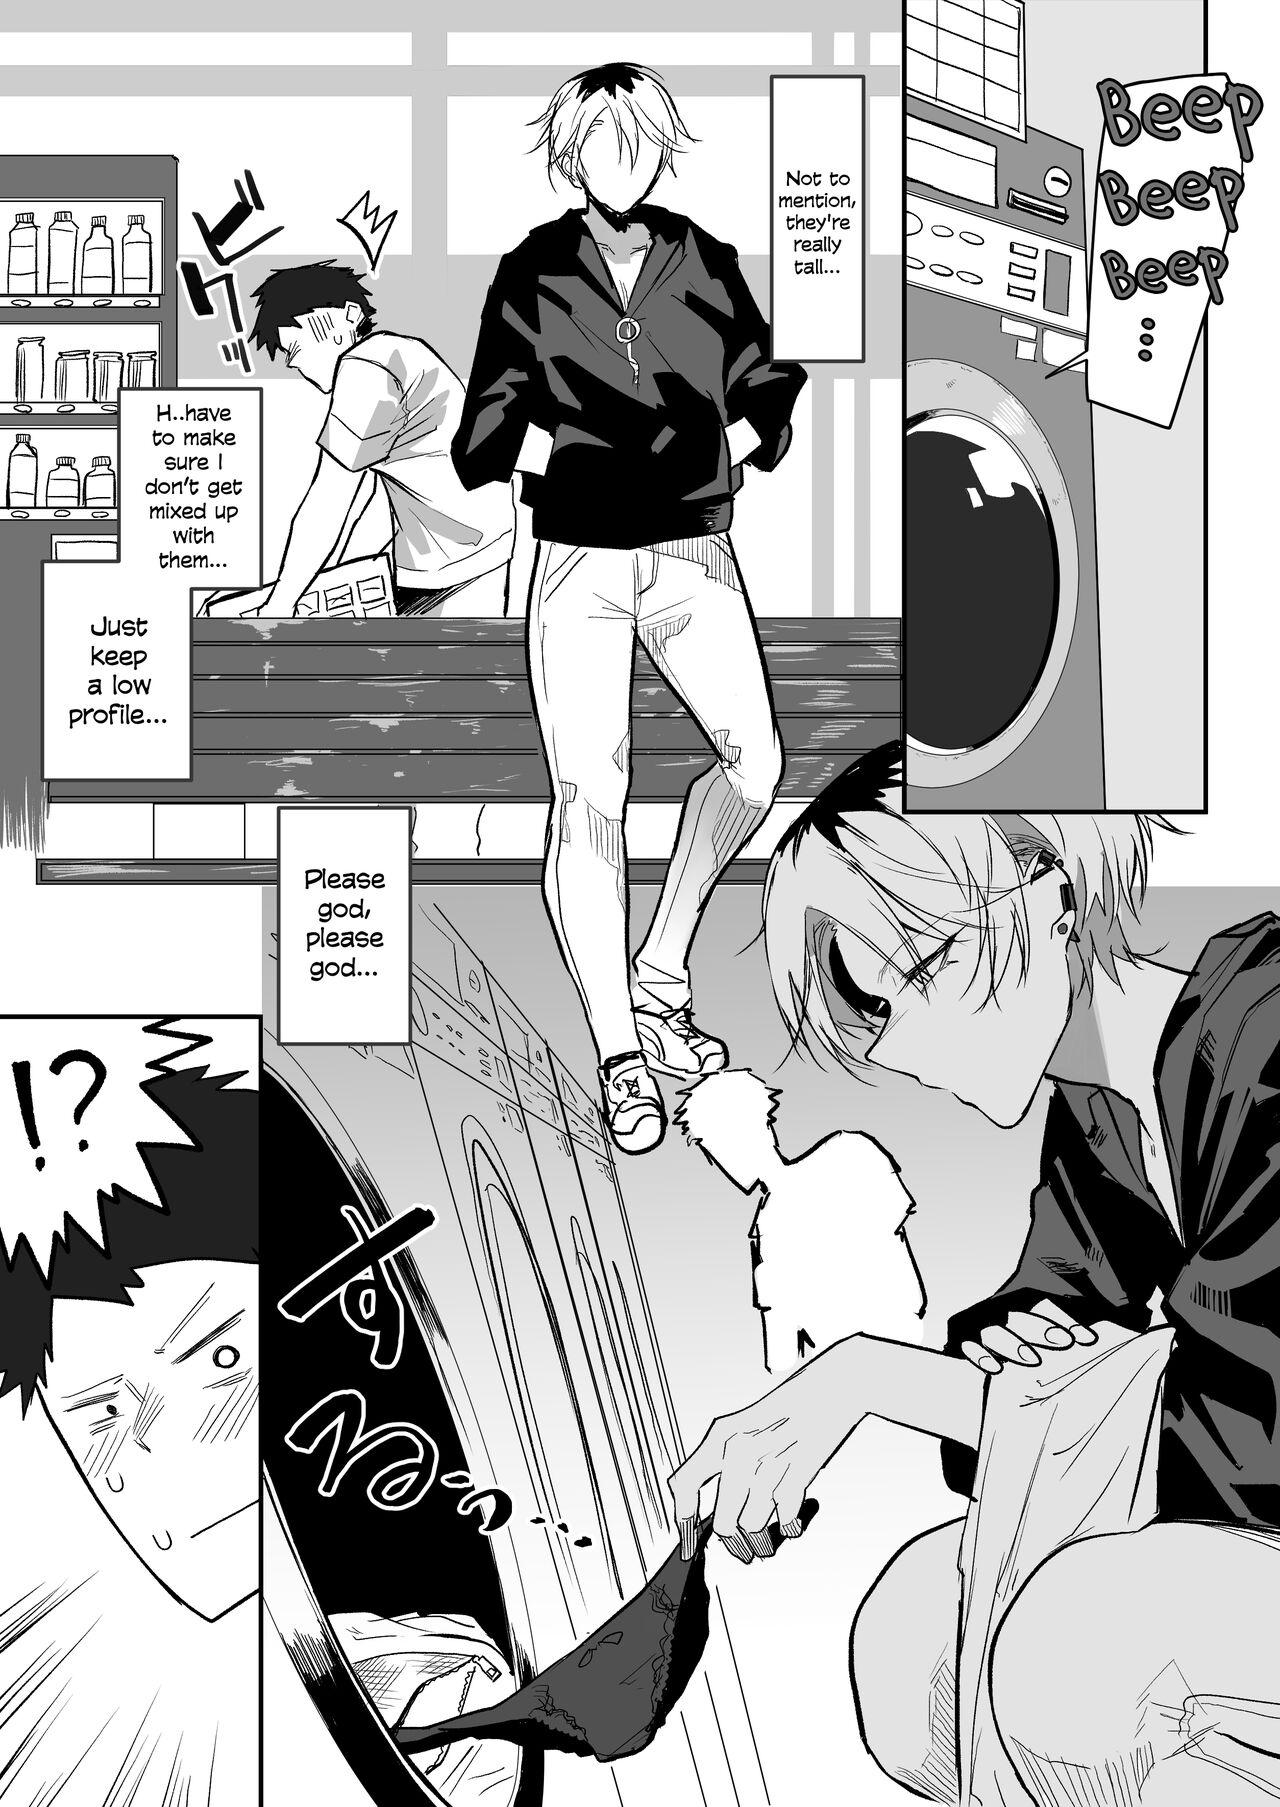 Porno Amateur Coin Laundry de Kowai Yankee ni Karamareru Manga | A Manga About Getting Mixed Up With A Scary Delinquent At The Laundromat - Original Juggs - Picture 2